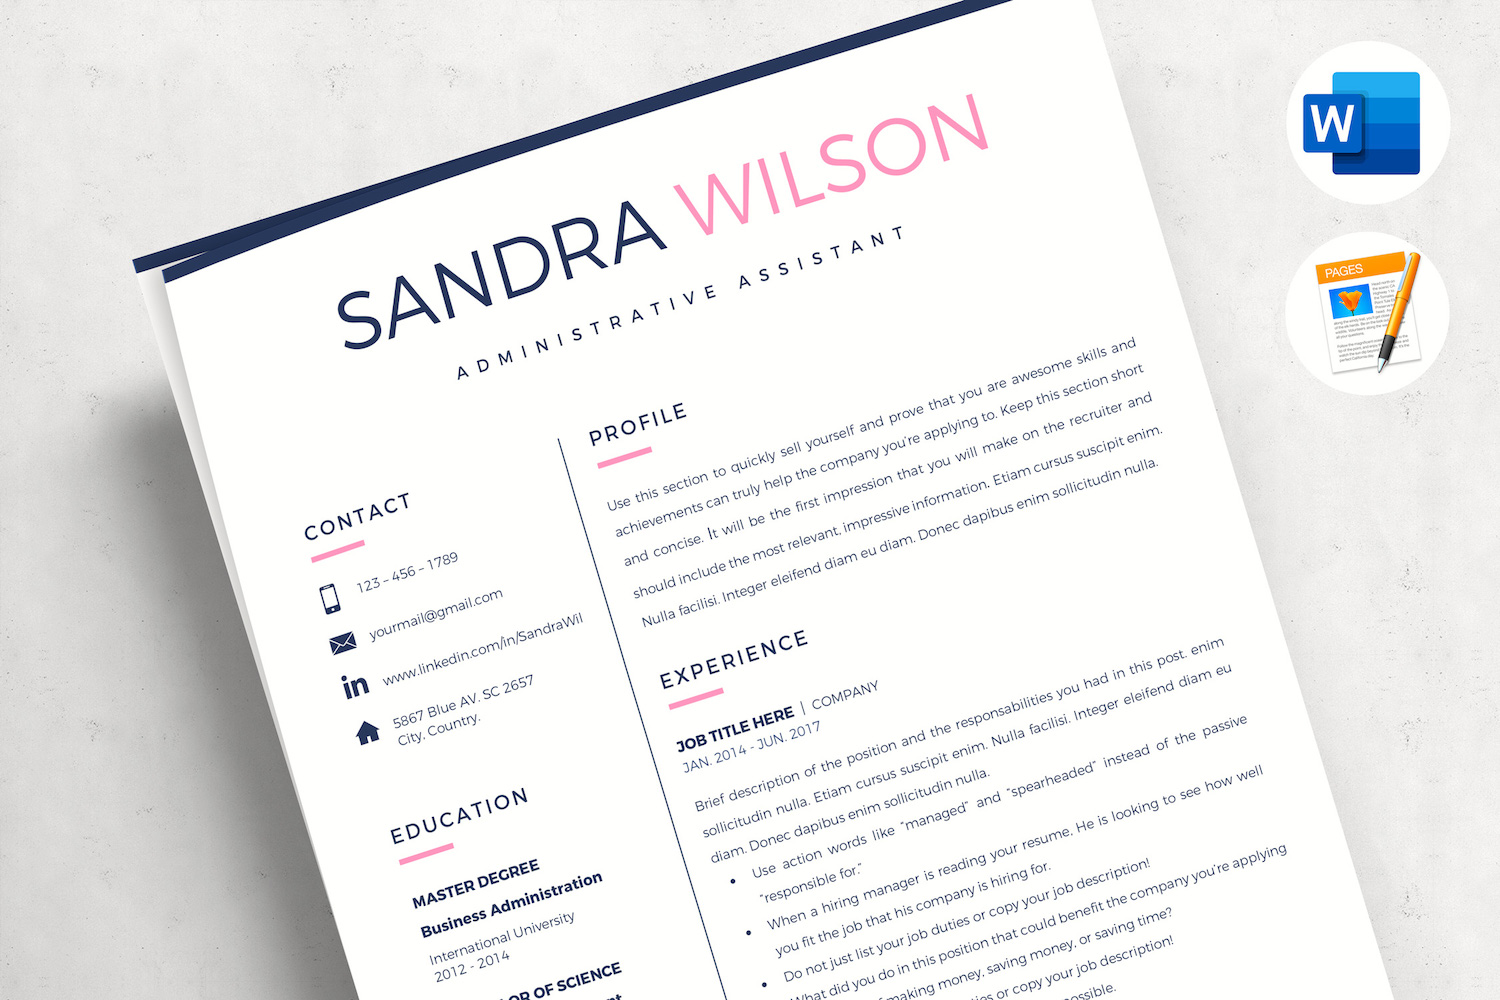 SANDRA P. - Creative Resume Template Bundle for Word and Pages. 2 & 3 Page Resume, CV with Cover